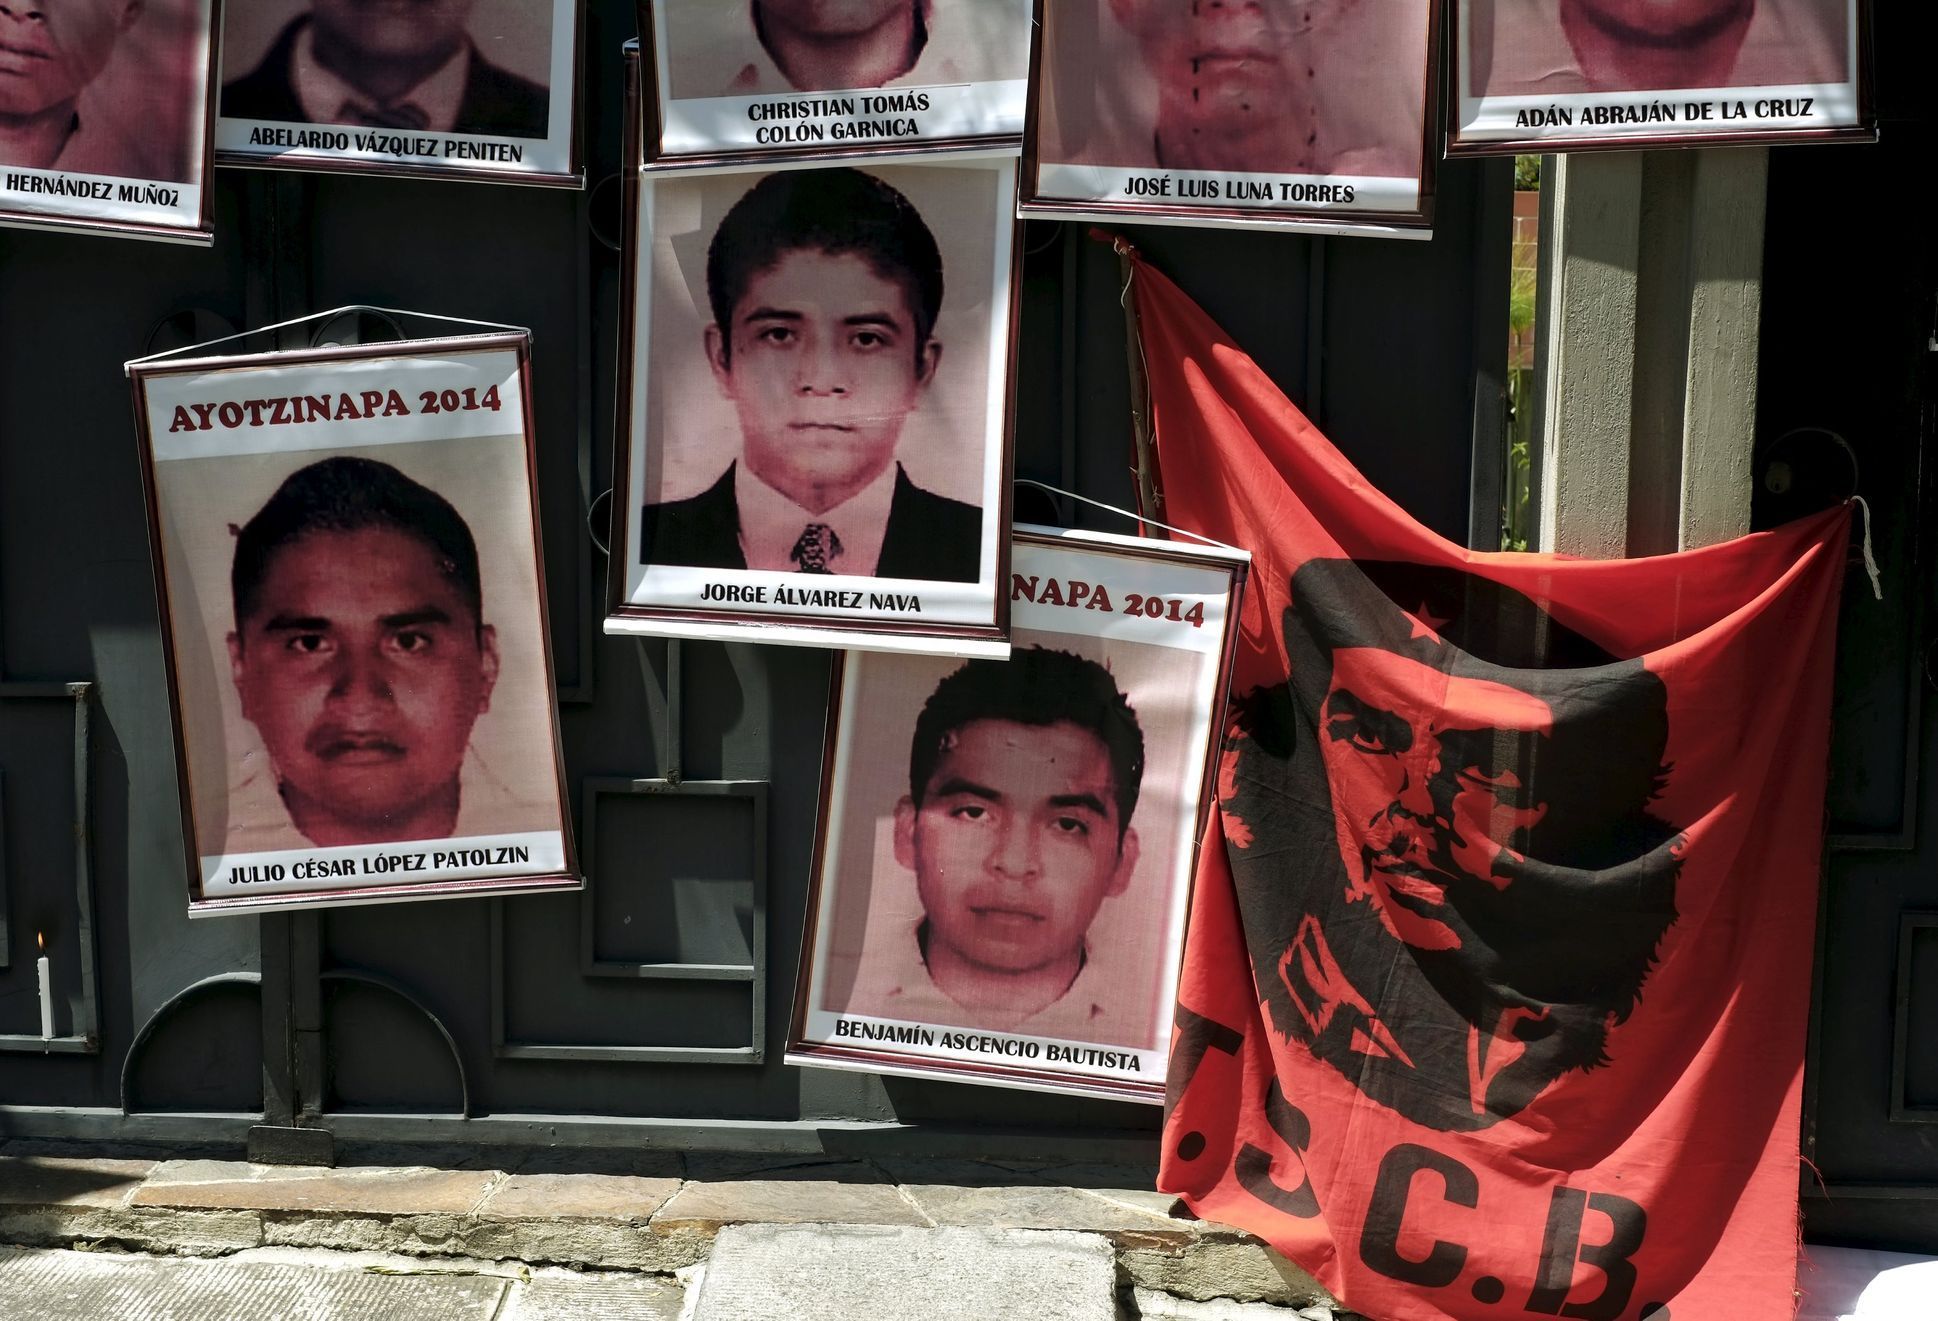 Pictures of the 43 Mexican students who disappeared a year ago are seen hung up near a banner of a revolutionary leader Che Guevara, on the entrance gate of the Mexican embassy in La Paz, Bolivia